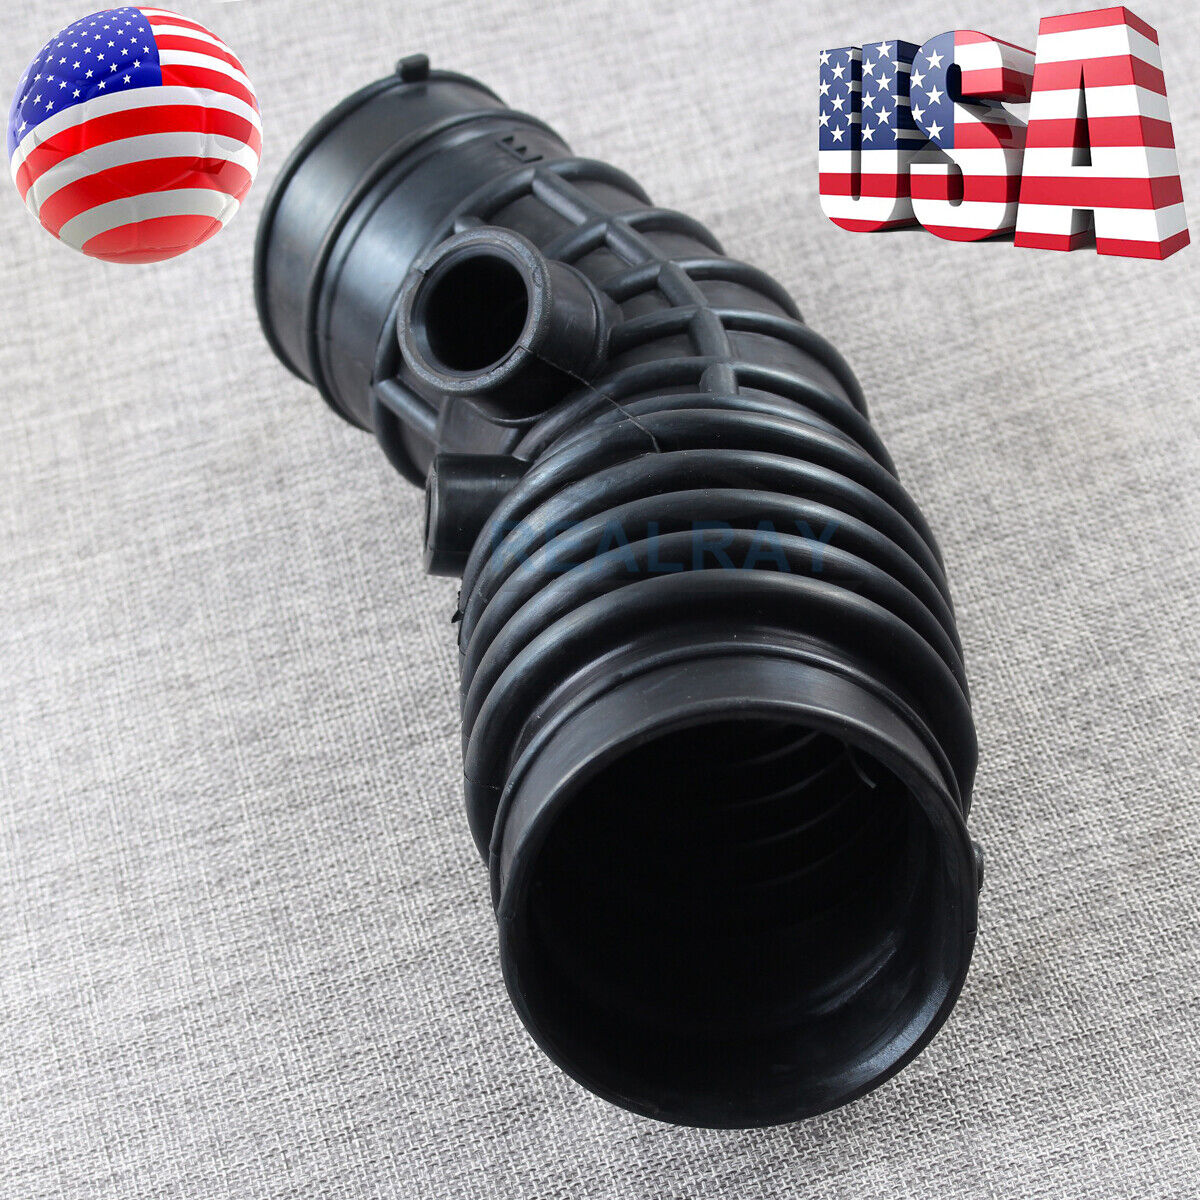 Black New Air Intake Hose 16578-4M801 Air Duct for 2000 2001 Nissan Sentra 2.0L 